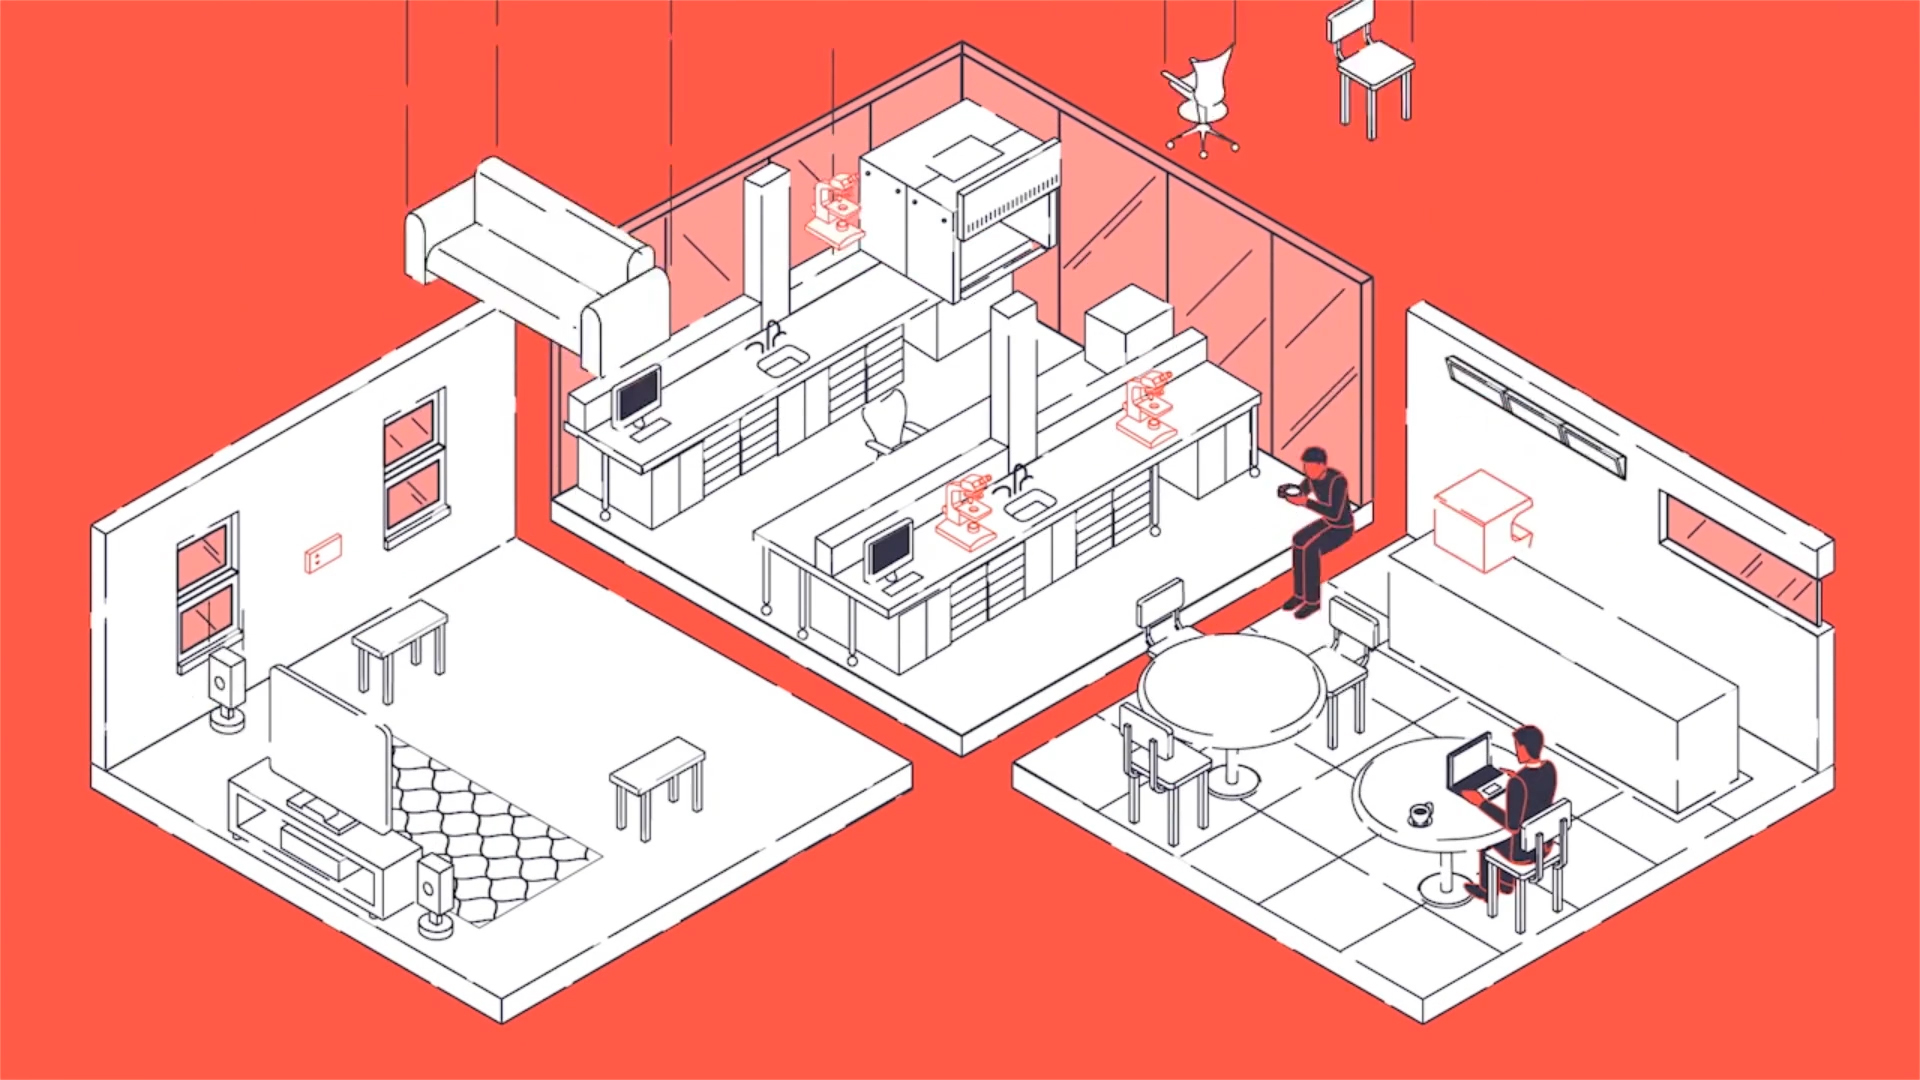 An image from an explainer video for Xively. Illustrations depict a modular set of scenes representing IoT in a home.